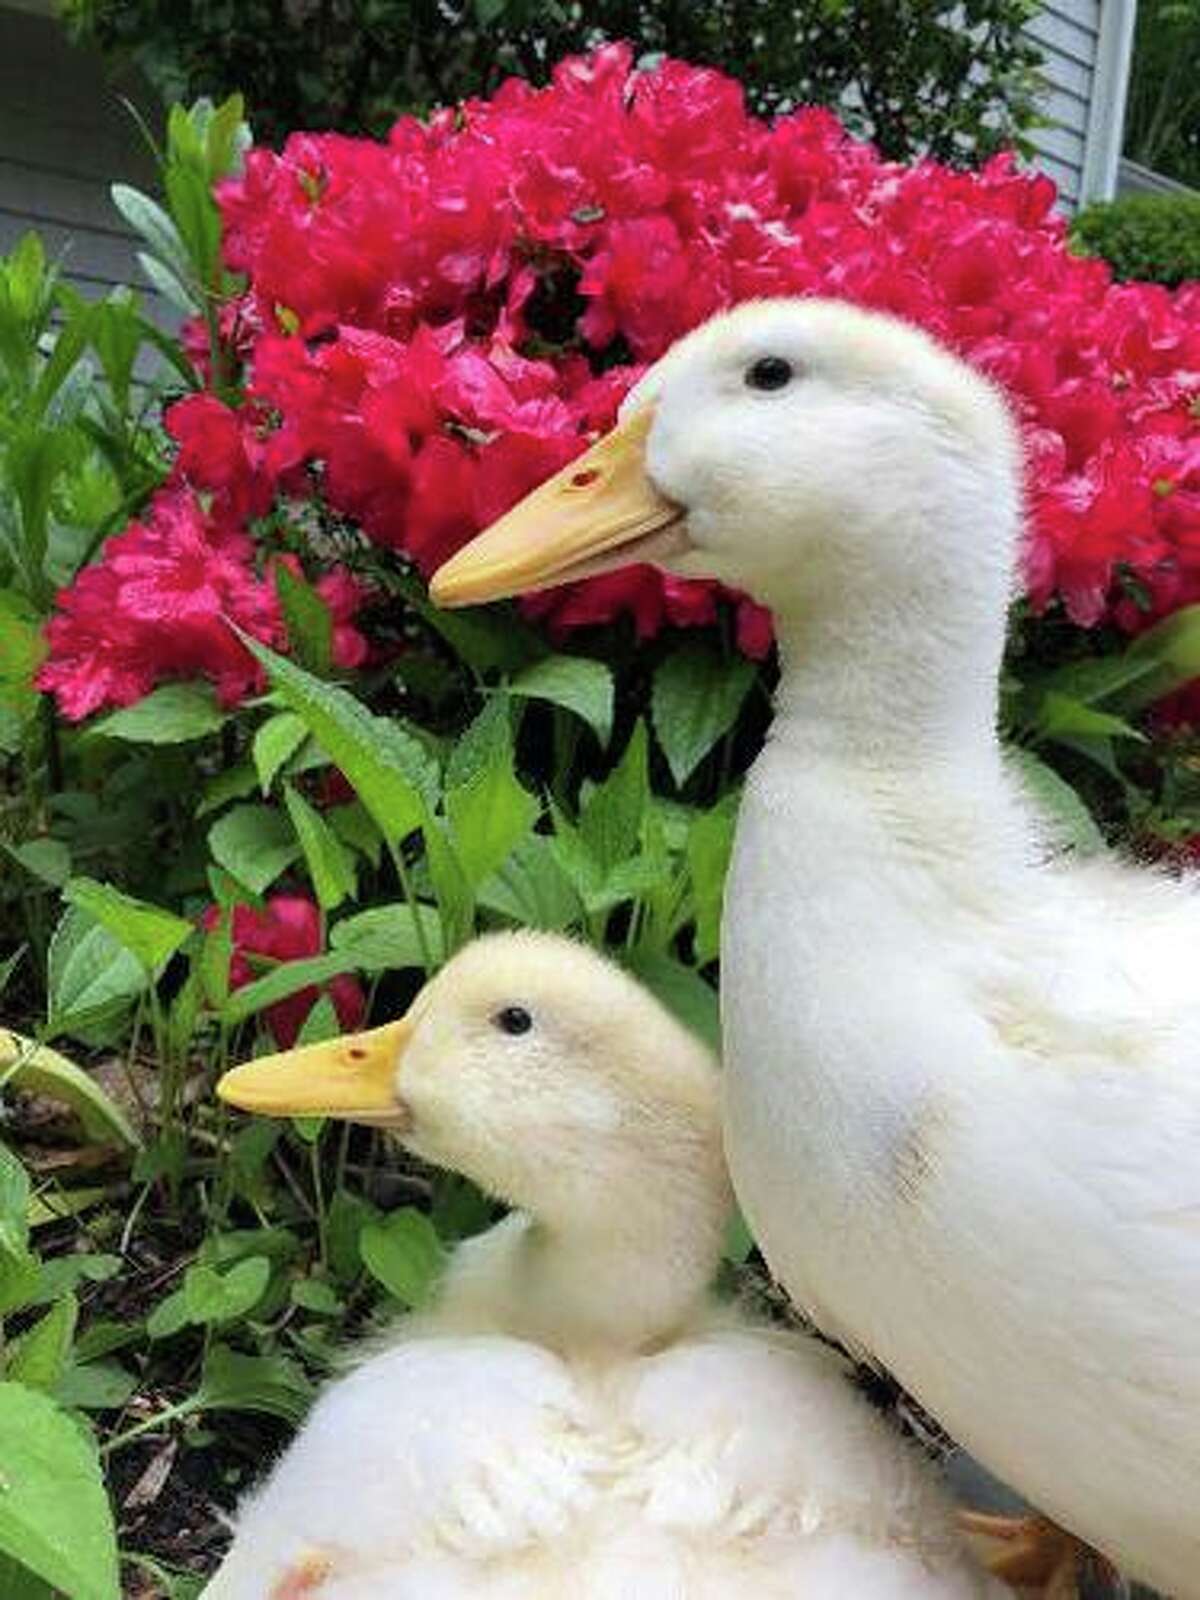 The Bousquet family adopted two Pekin ducks in April. From left, sisters Quackers and Peanut Butter were raised in the family home until Peanut Butter was killed by a raccoon and Quackers went missing.